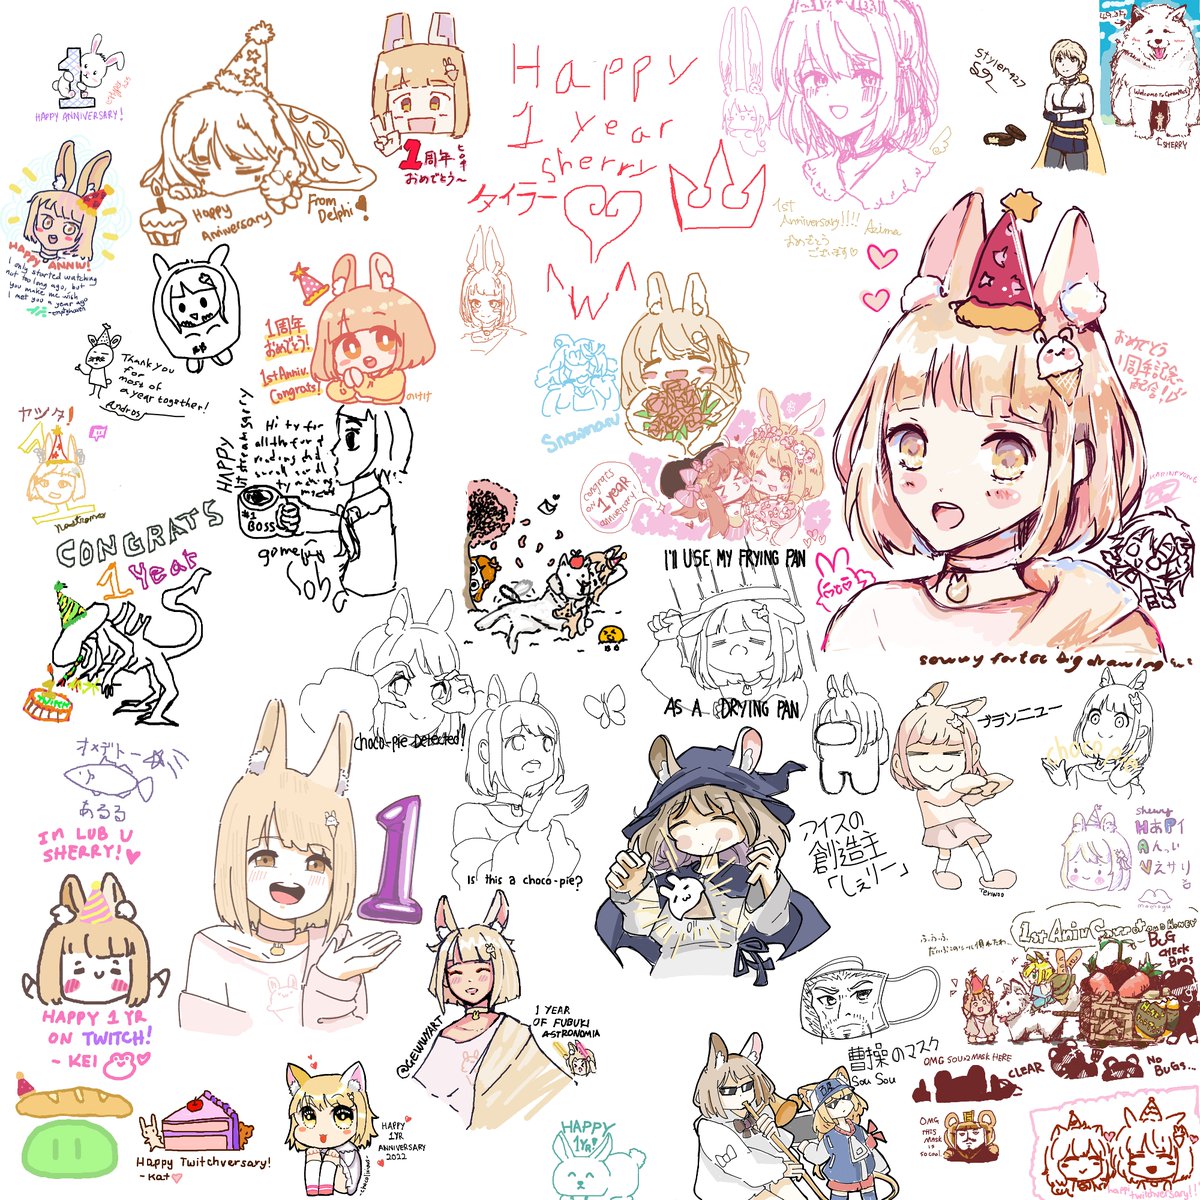 thank you so much for spending time with me to celebrate our 1 year twitchversary yesterday, everyone!!!! ;U; i had such a good time and i hope you all did too!!!! (≧∀≦)💓
1周年を盛大に祝ってくれて本当にありがとう、みんな!!!!めちゃくちゃ楽しい13時間だった!!!!(≧∀≦)💓 